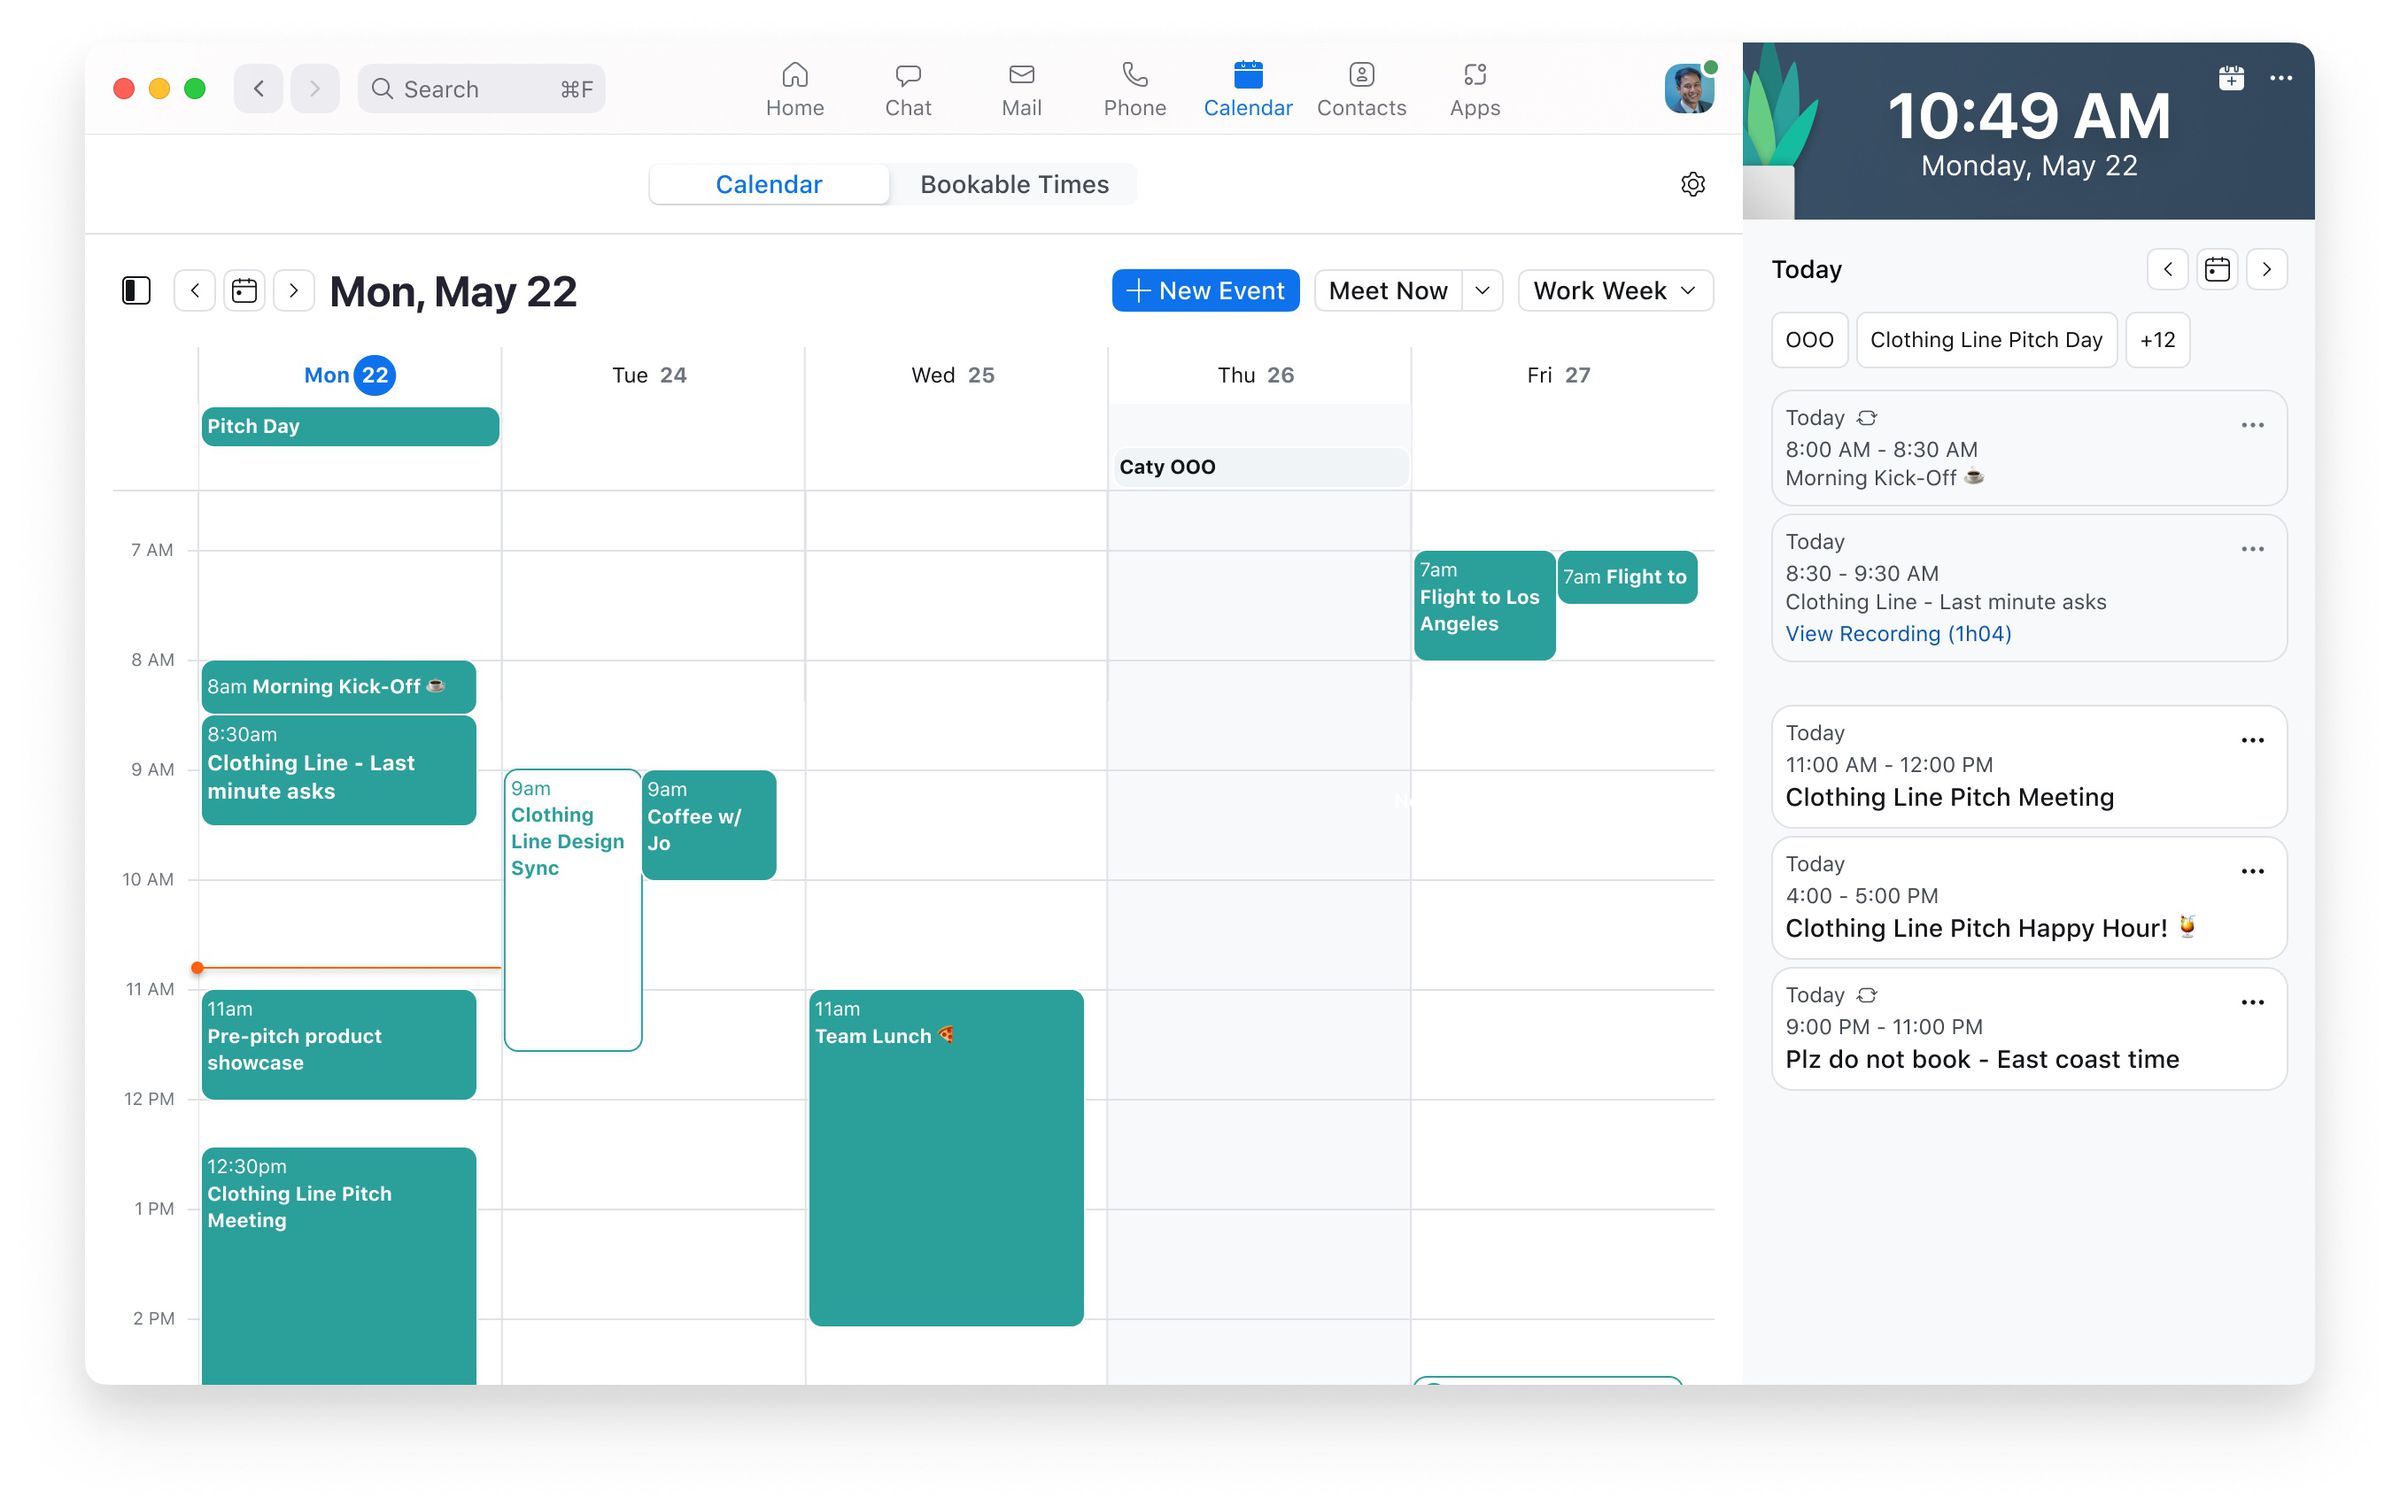 Calendar integration makes joining Zoom meetings or viewing recordings easier without the hassle of links.